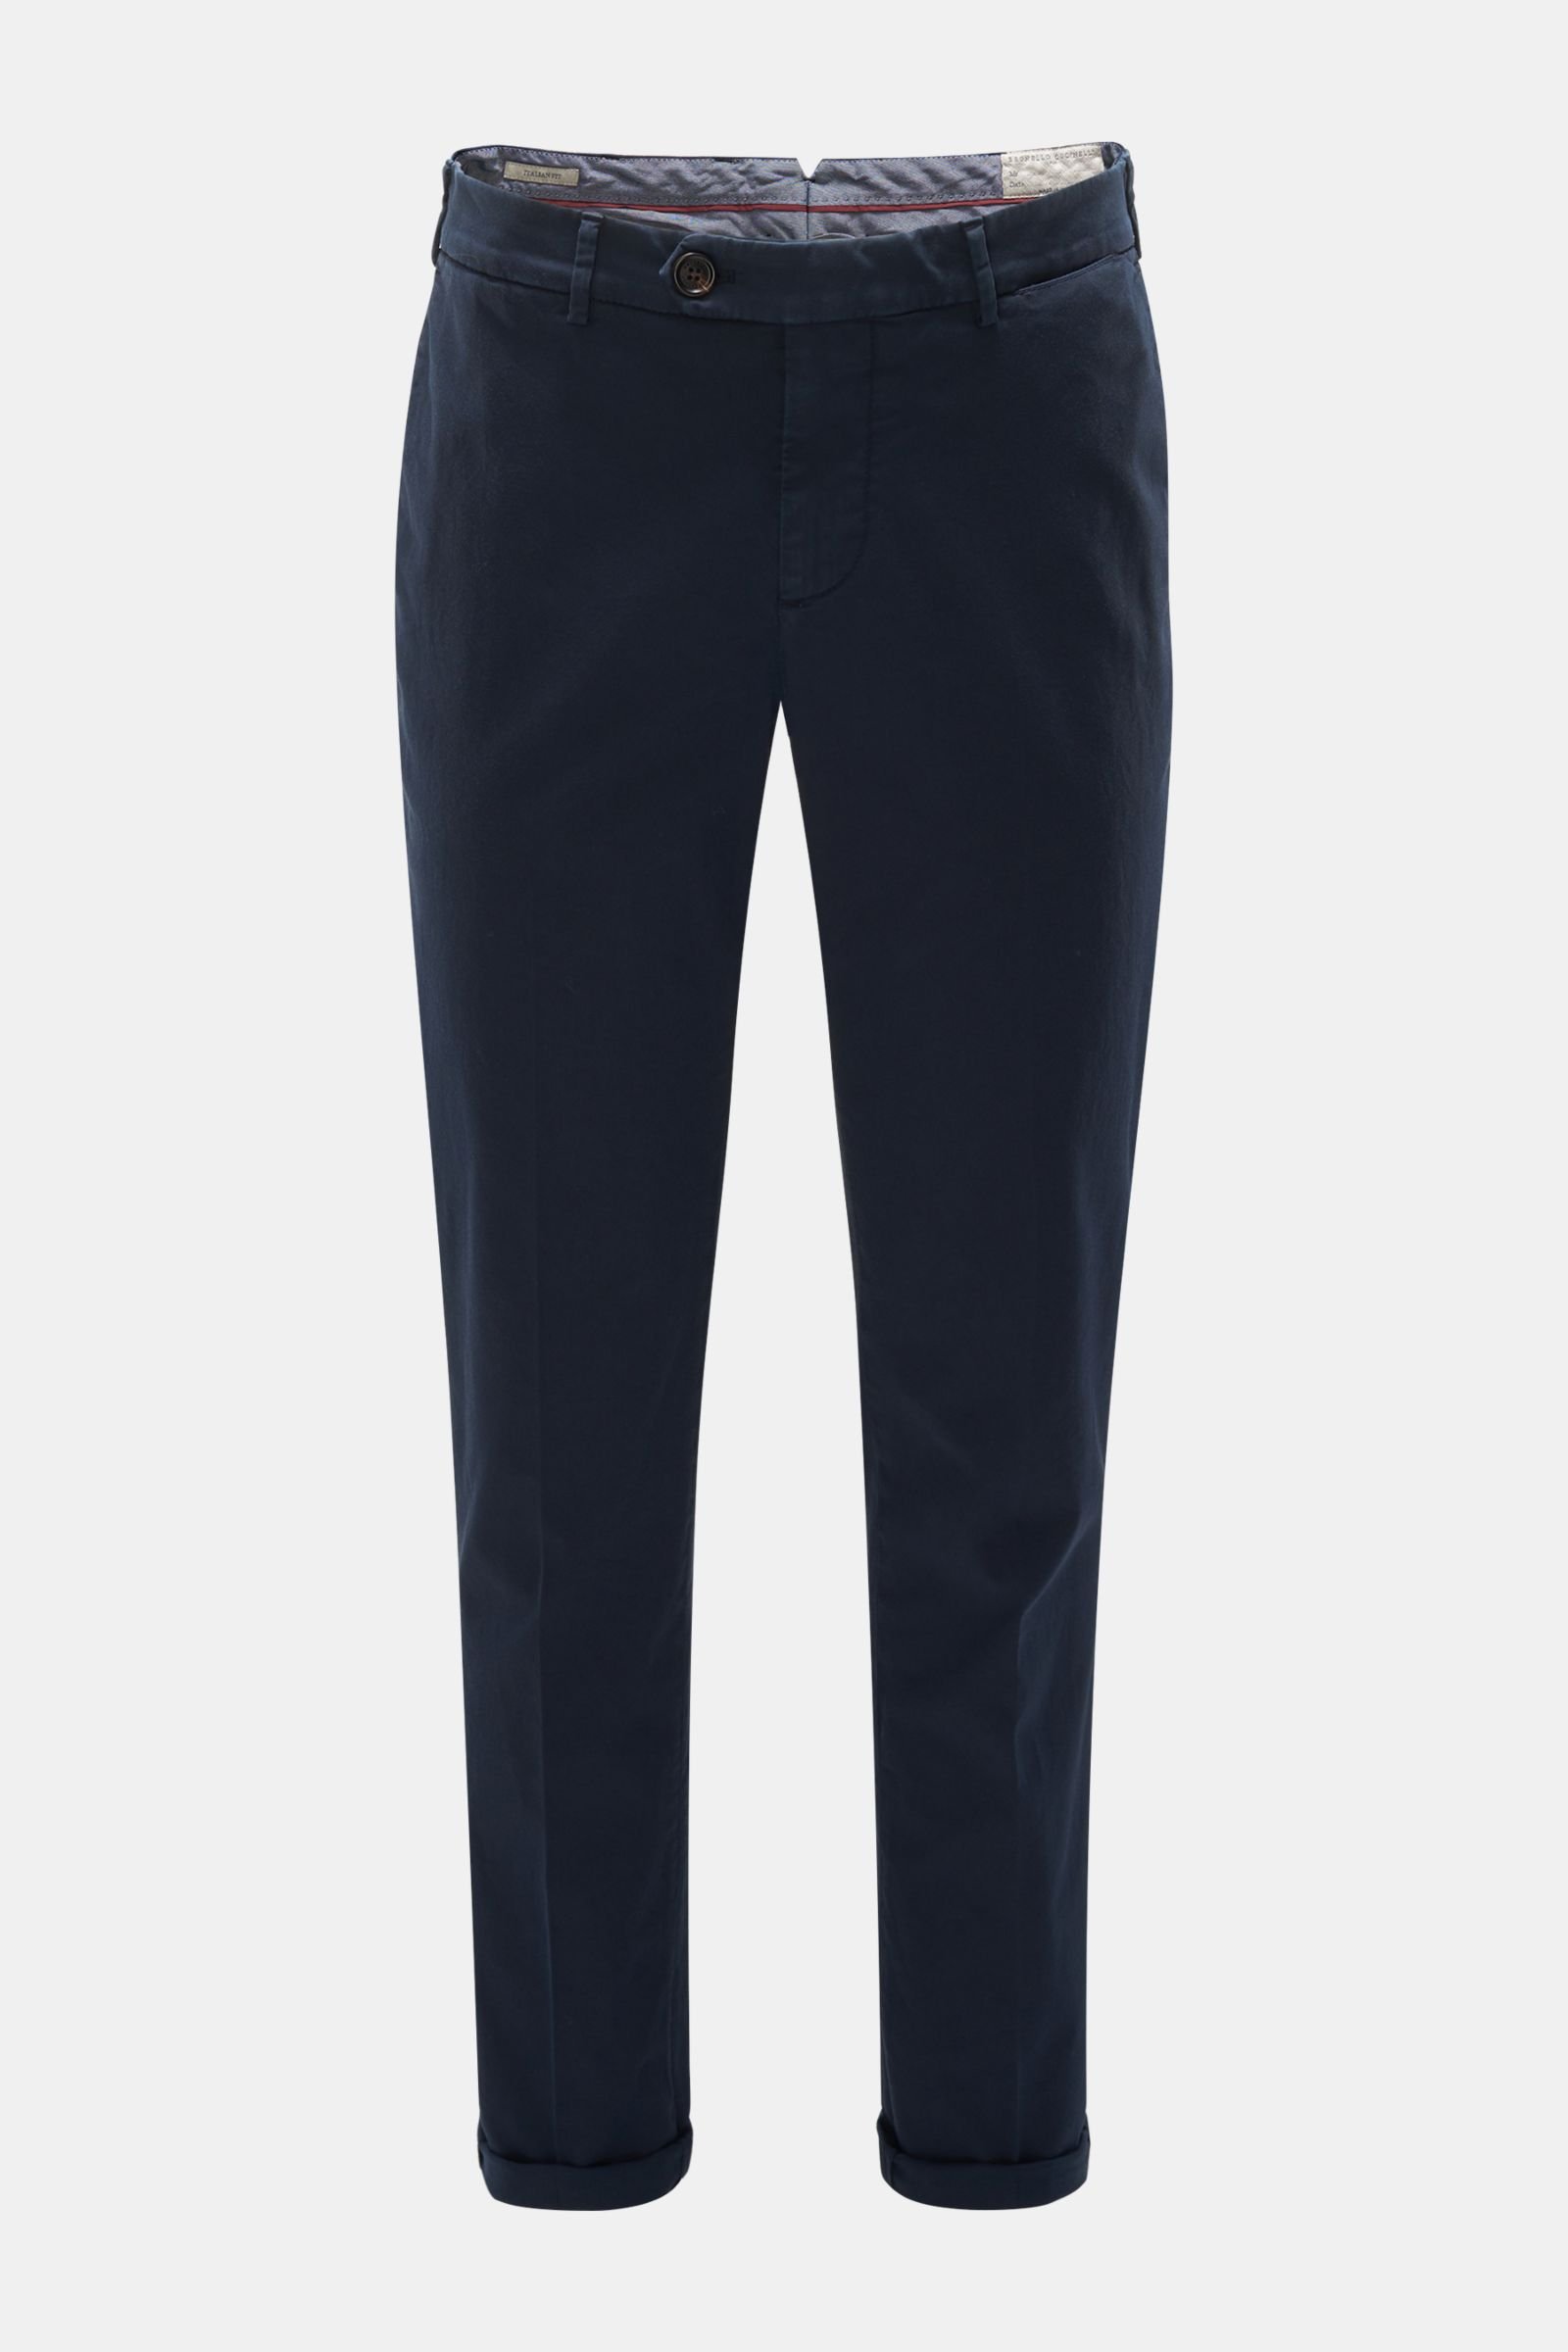 Chino 'Traditional Fit' navy